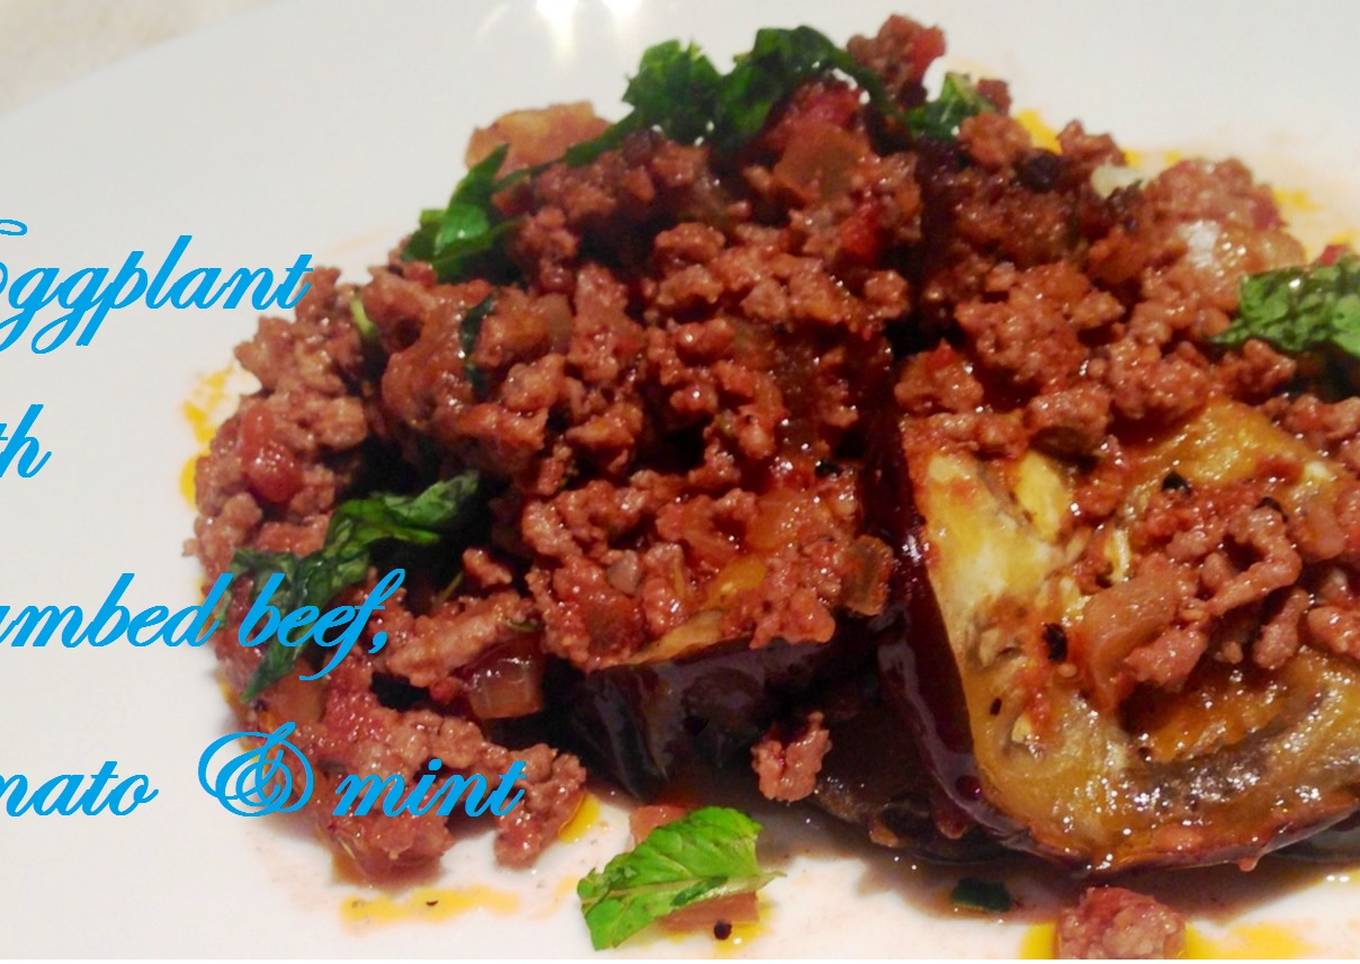 eggplant with crumbed beef tomato and mint